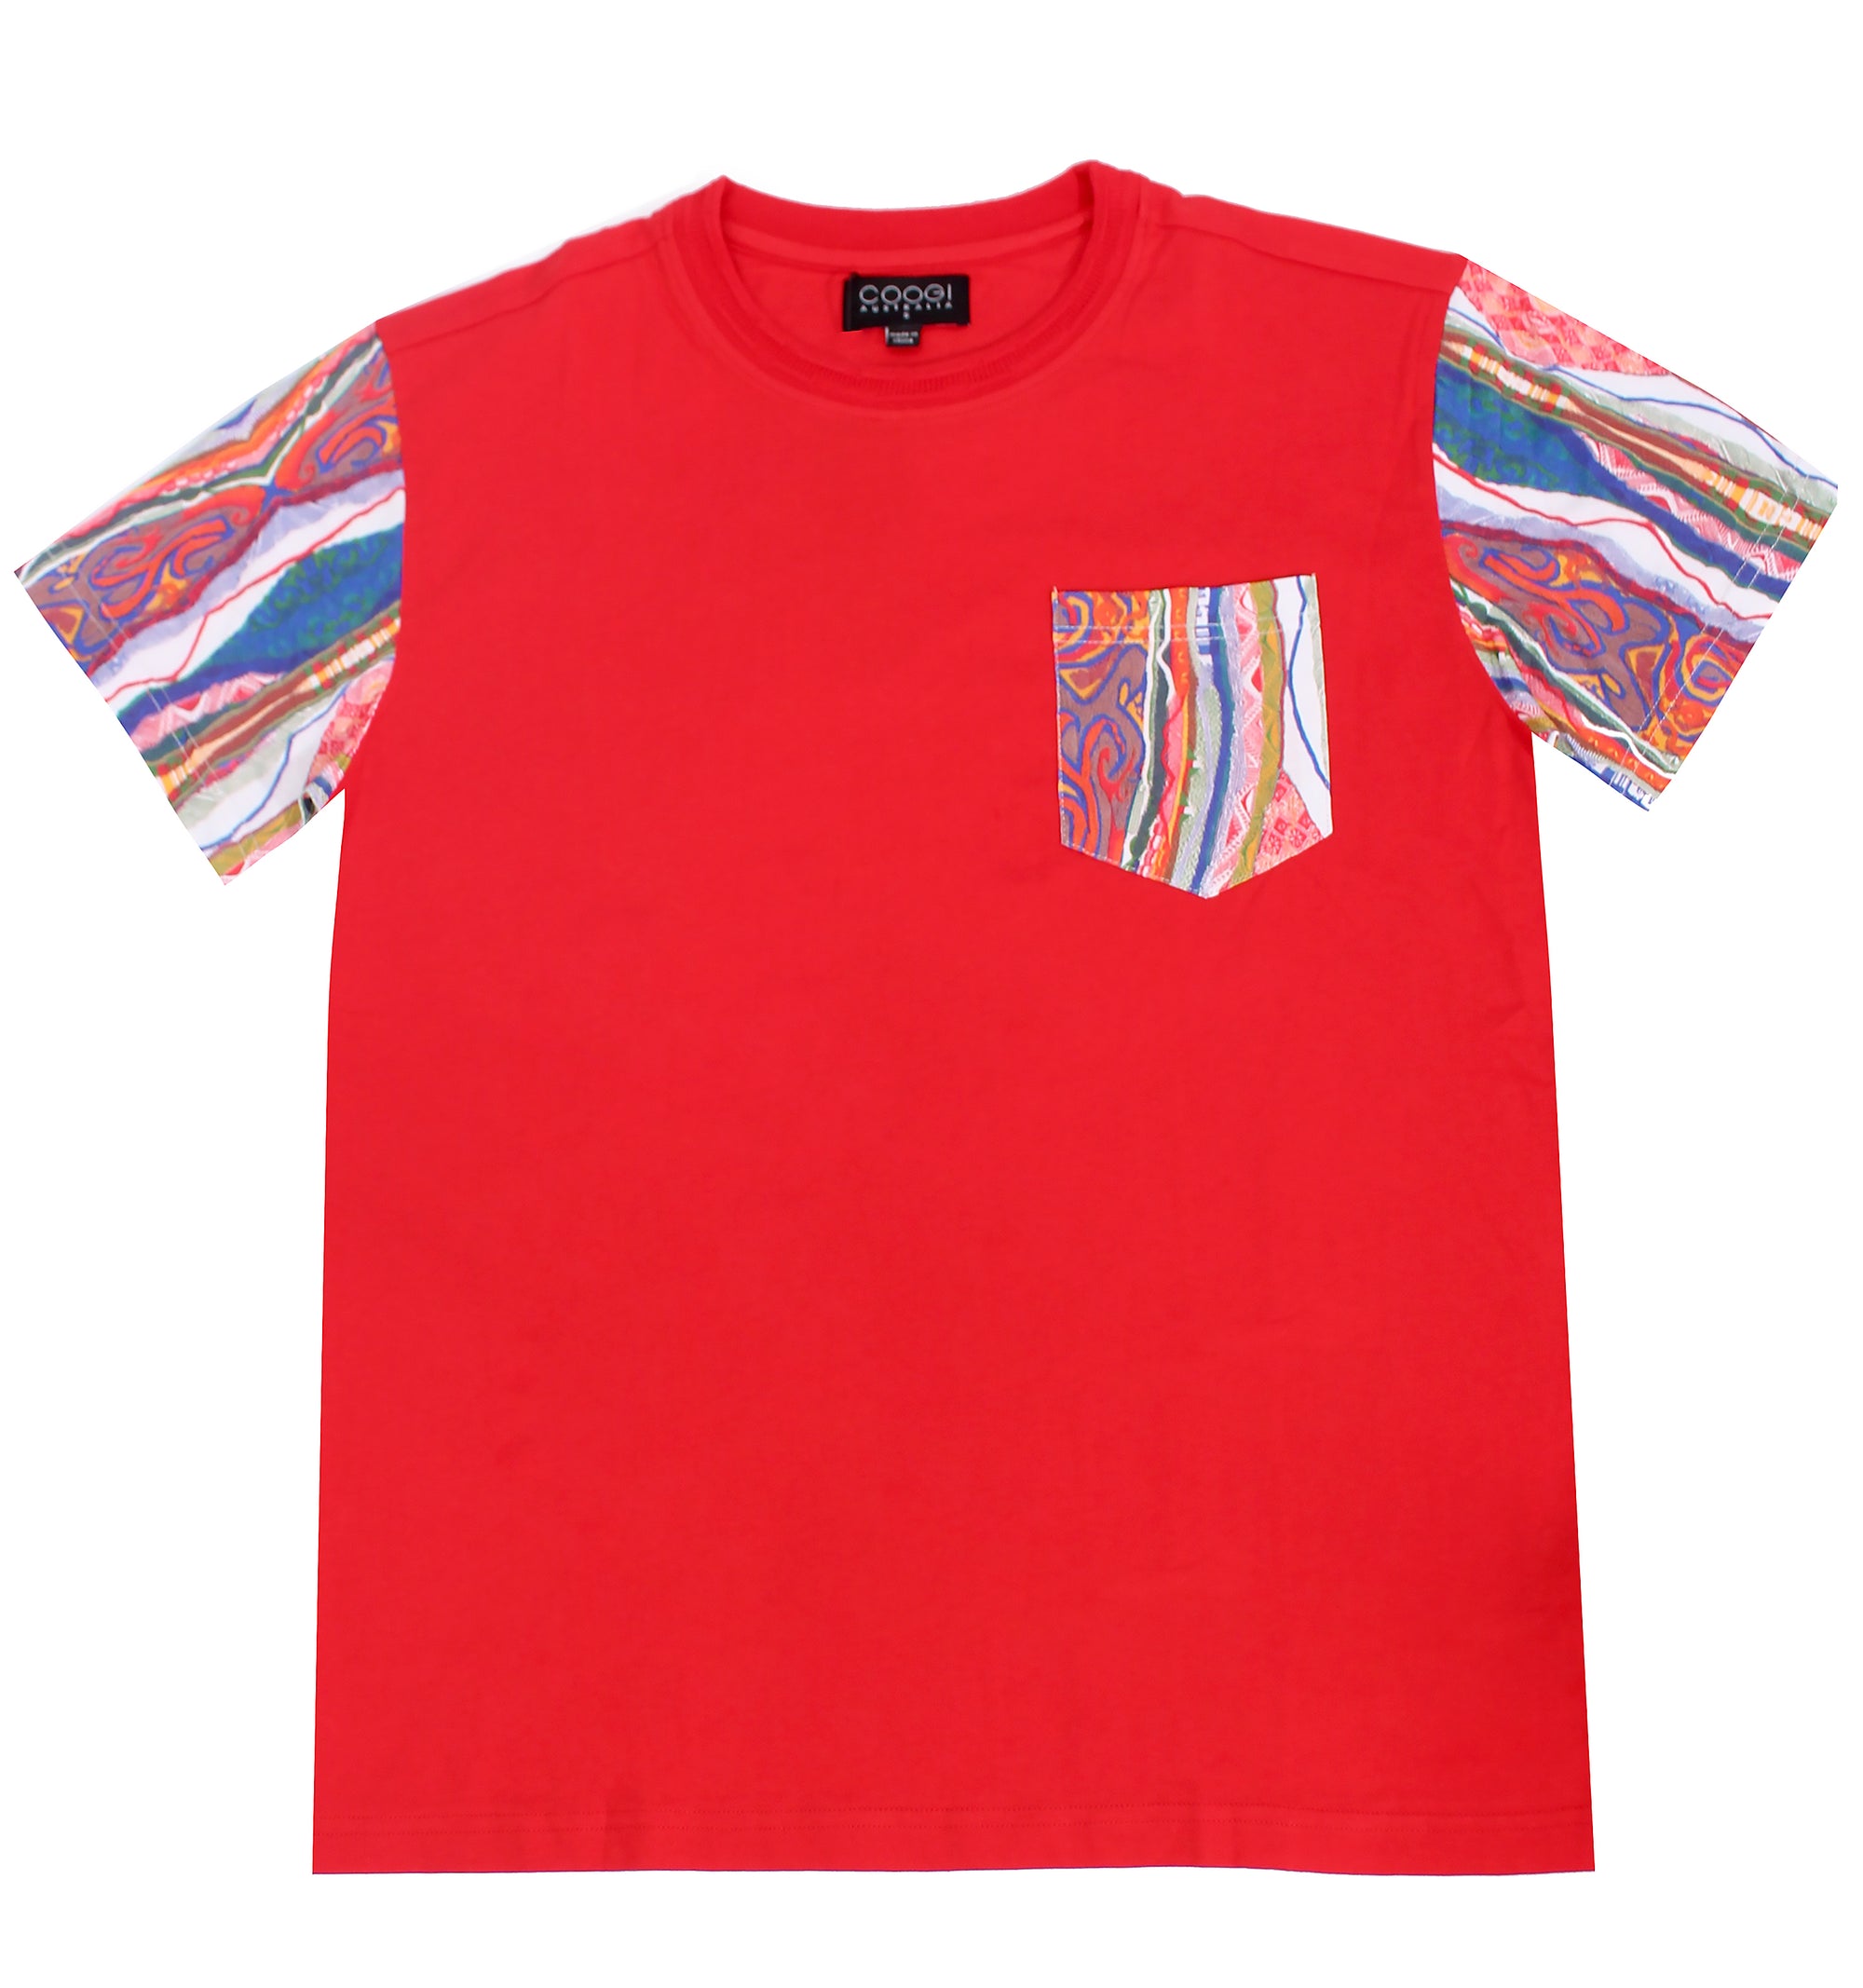 Coogi Classic Patchwork Tee - Red